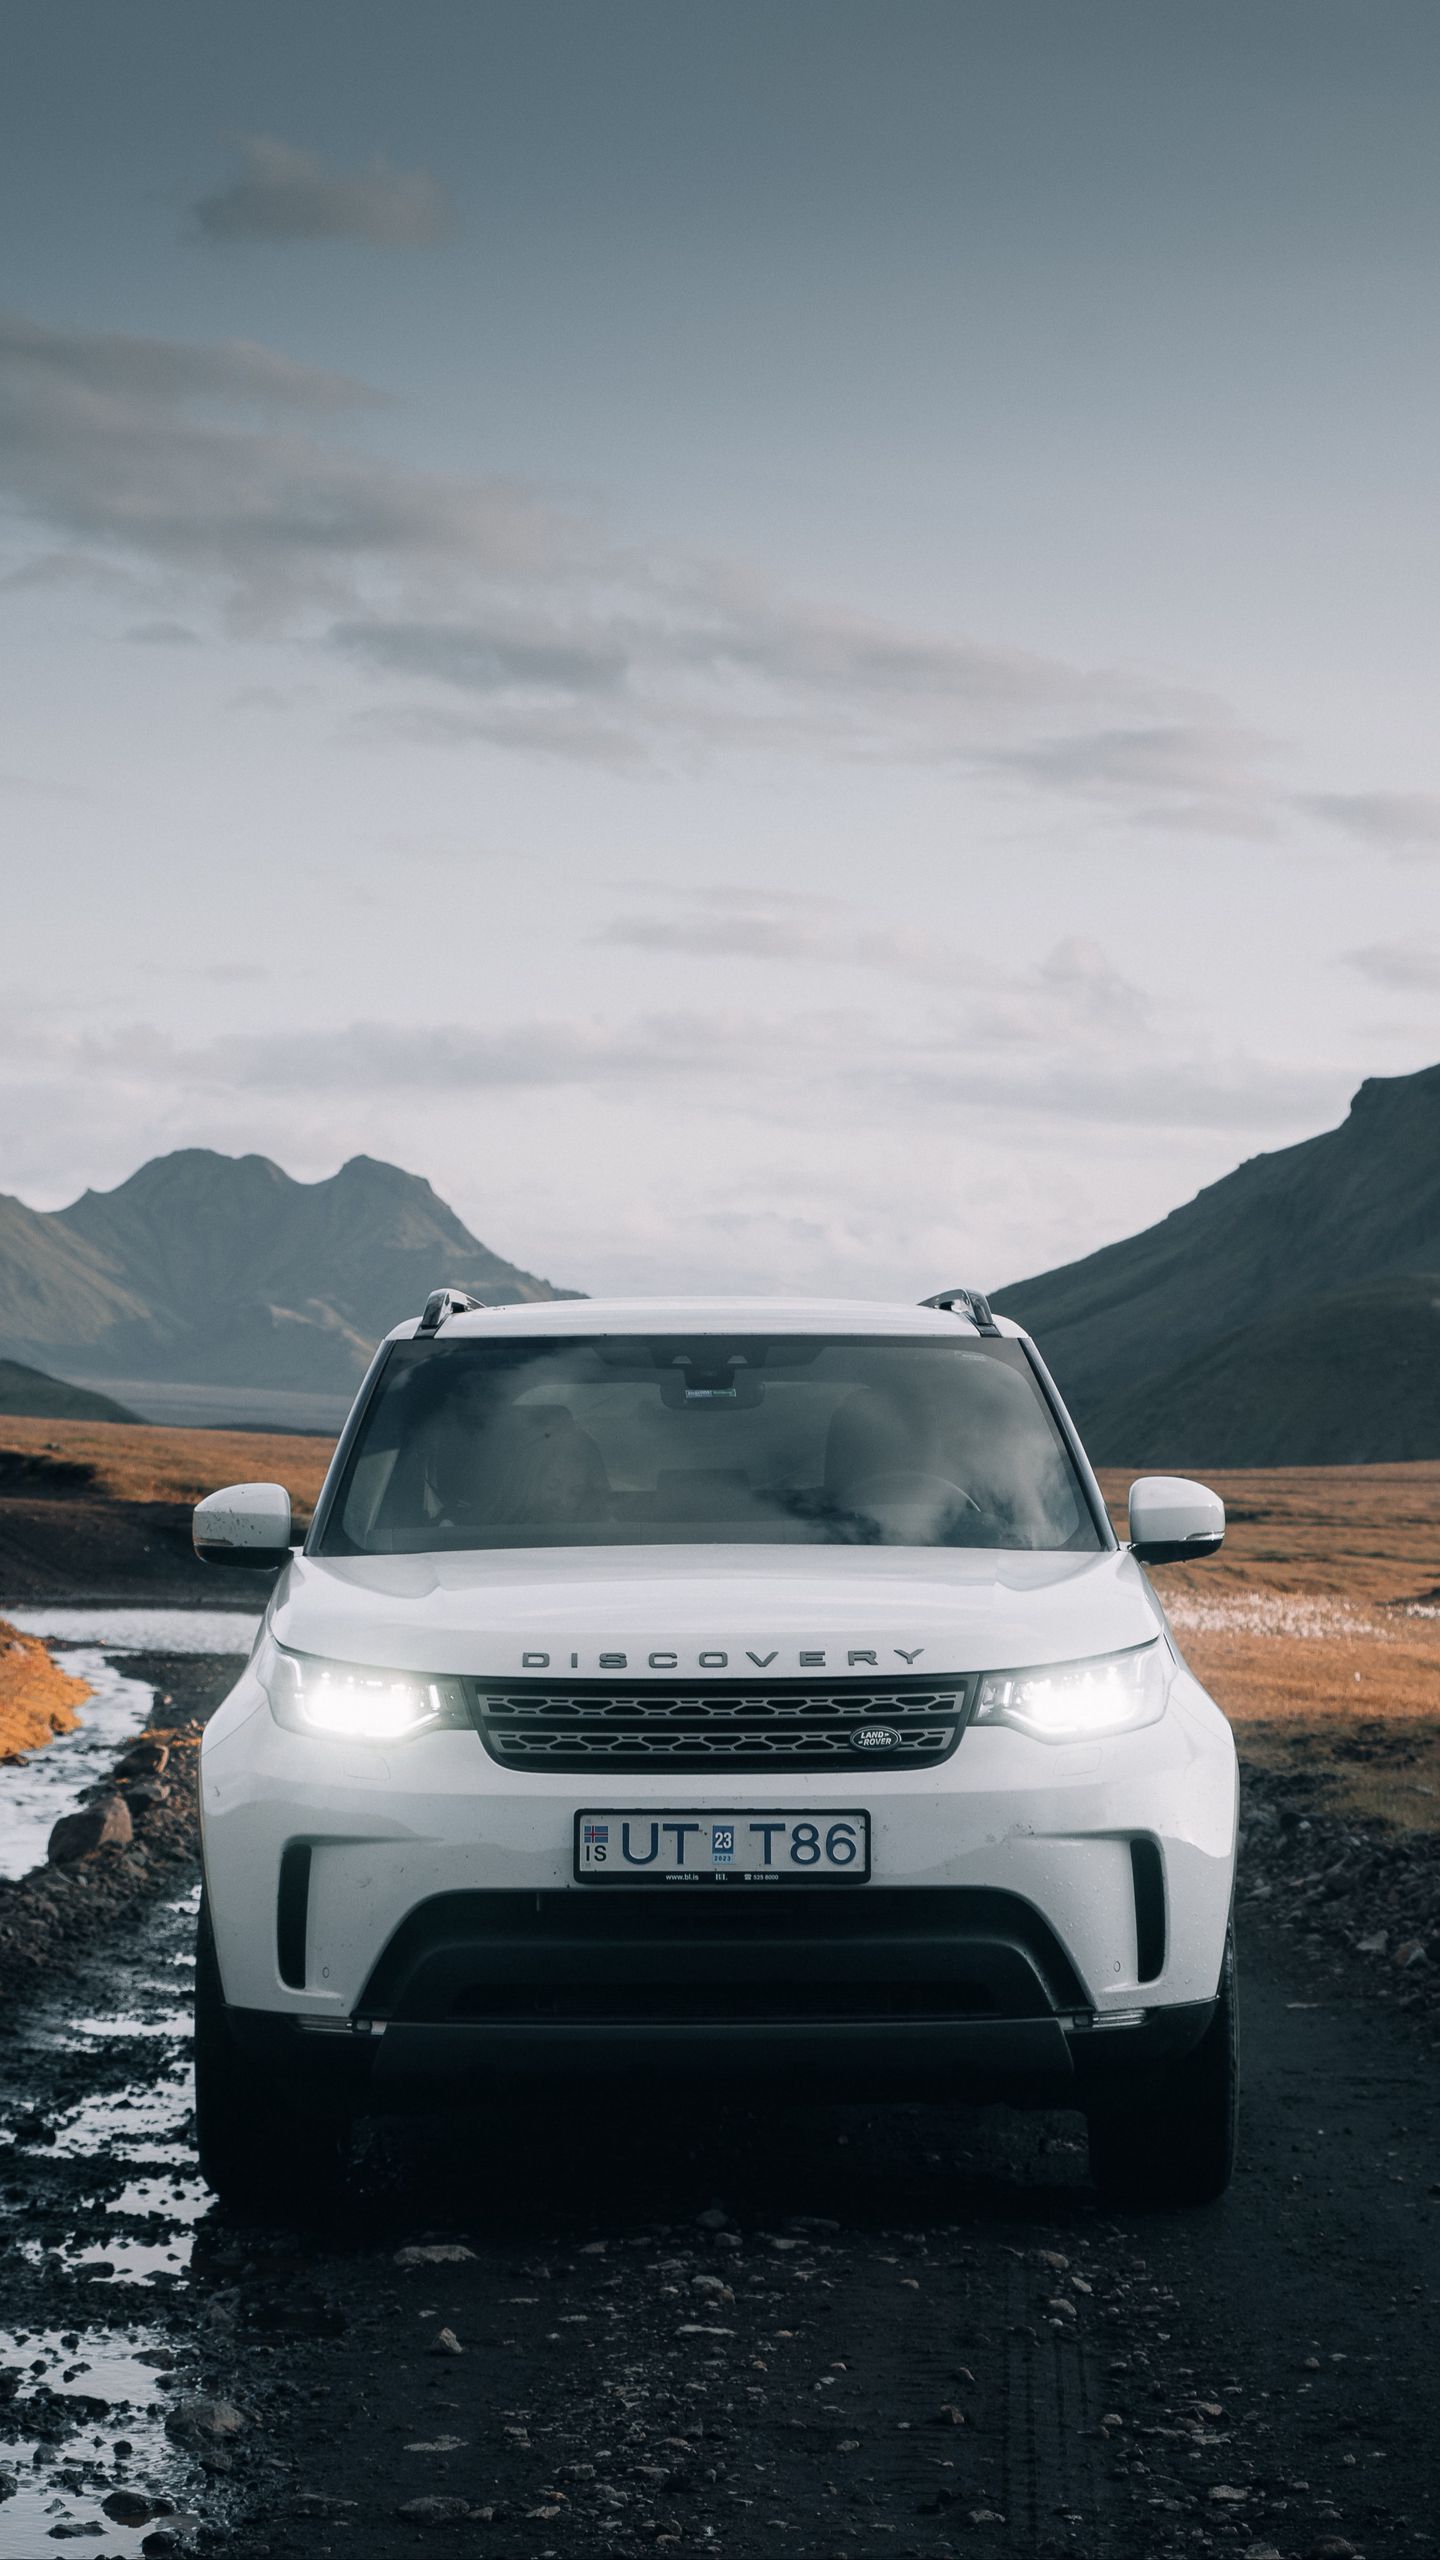 Download wallpaper 1440x2560 land rover discovery, land rover, car, suv,  white, front view qhd samsung galaxy s6, s7, edge, note, lg g4 hd background